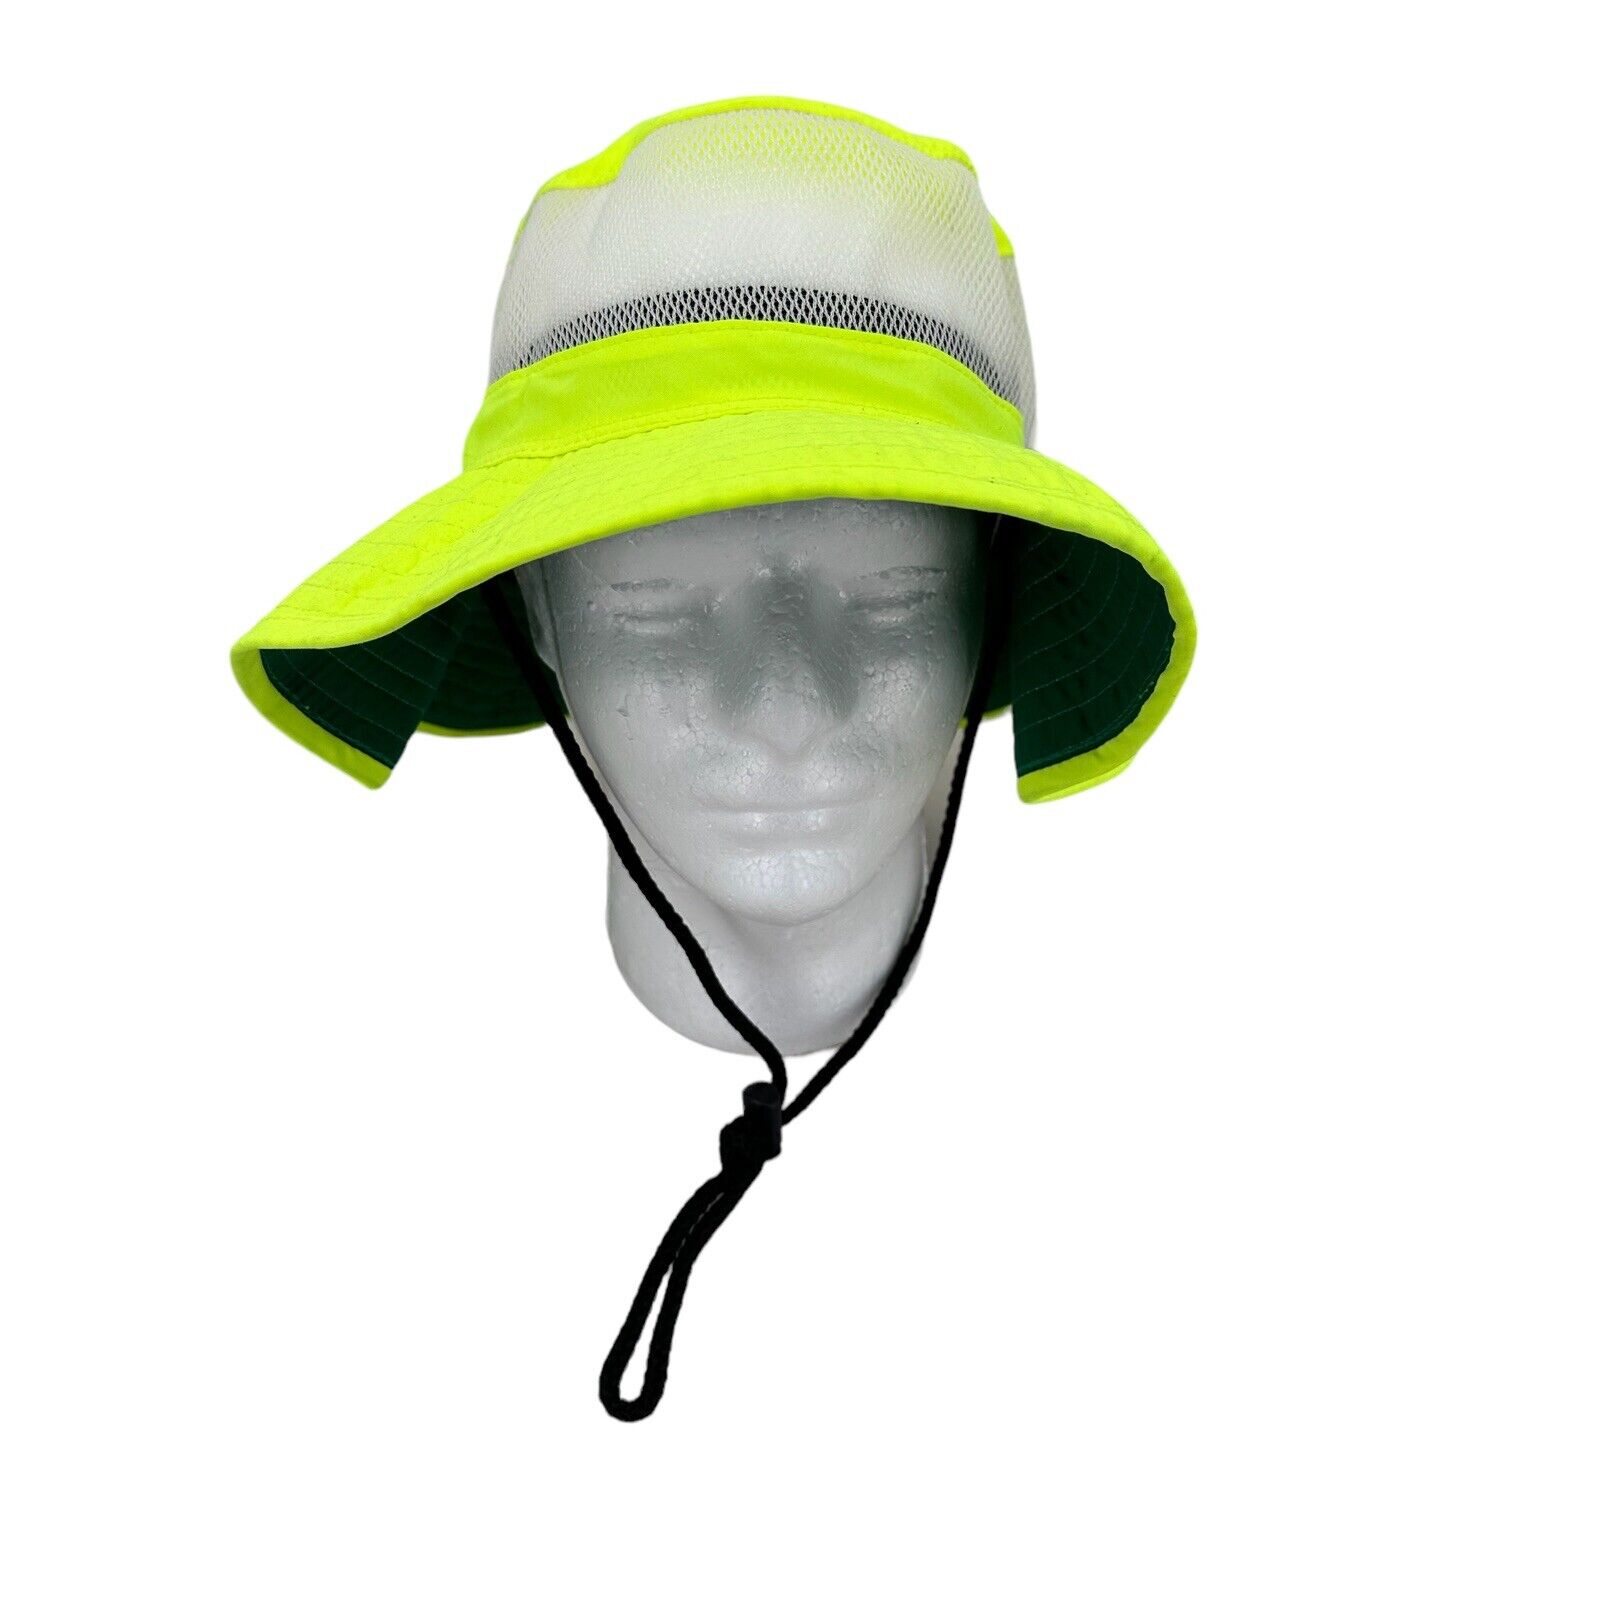 Outdoors Mens One Size Adjustable Chin Strap Cooling Mesh Bucket Hat Yellow